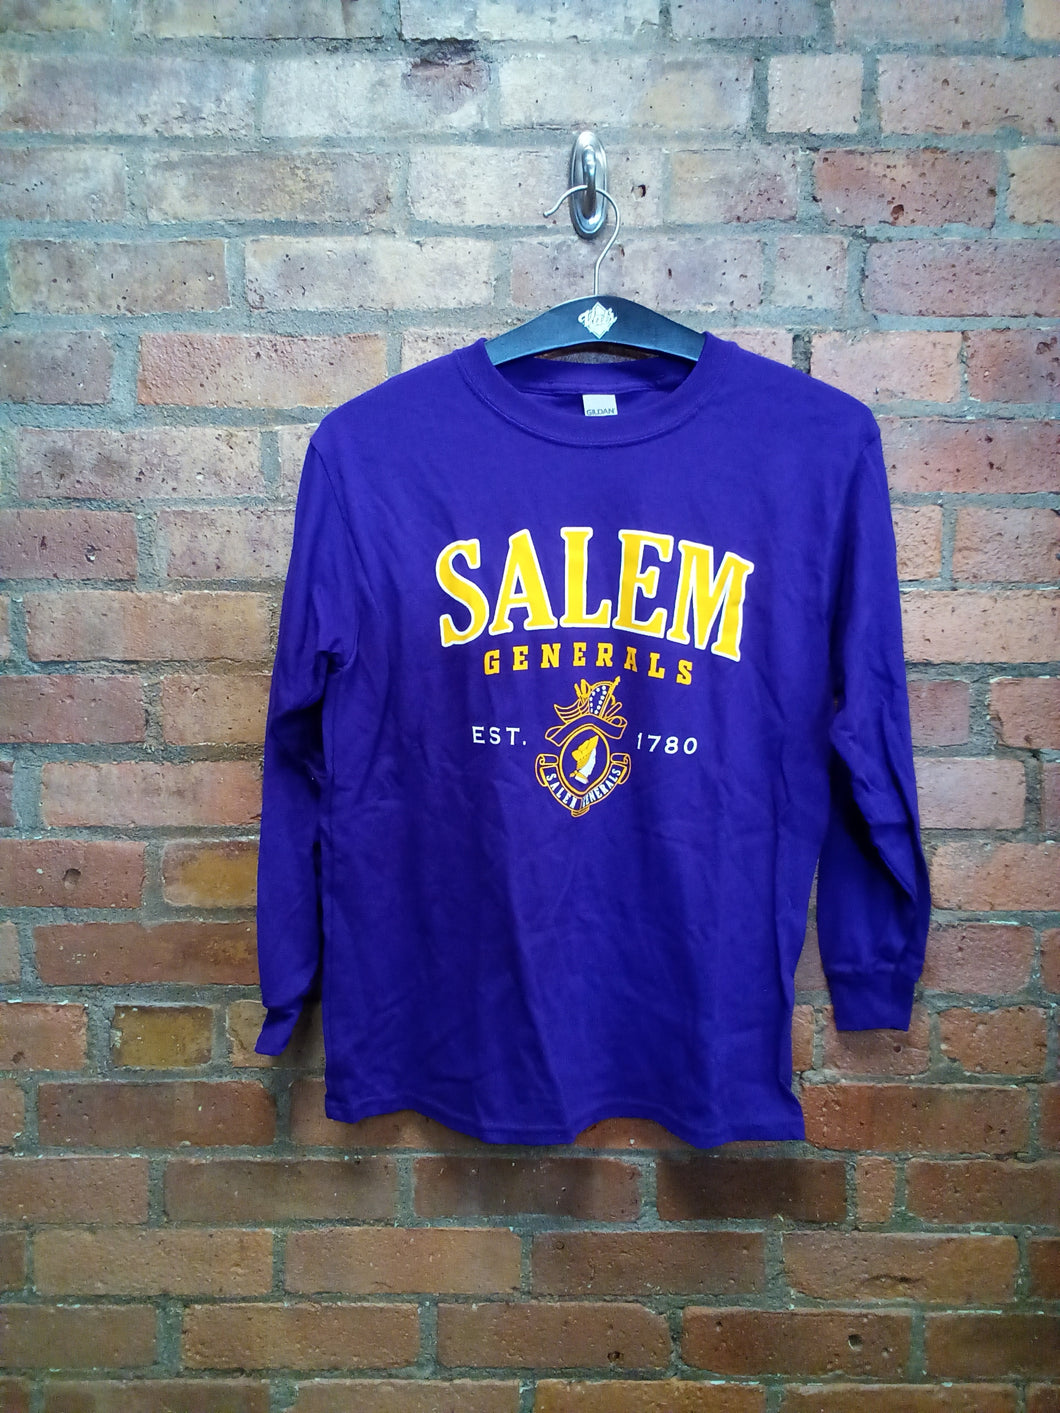 CLEARANCE - Salem Generals Youth Long Sleeved Shirt - Size Large